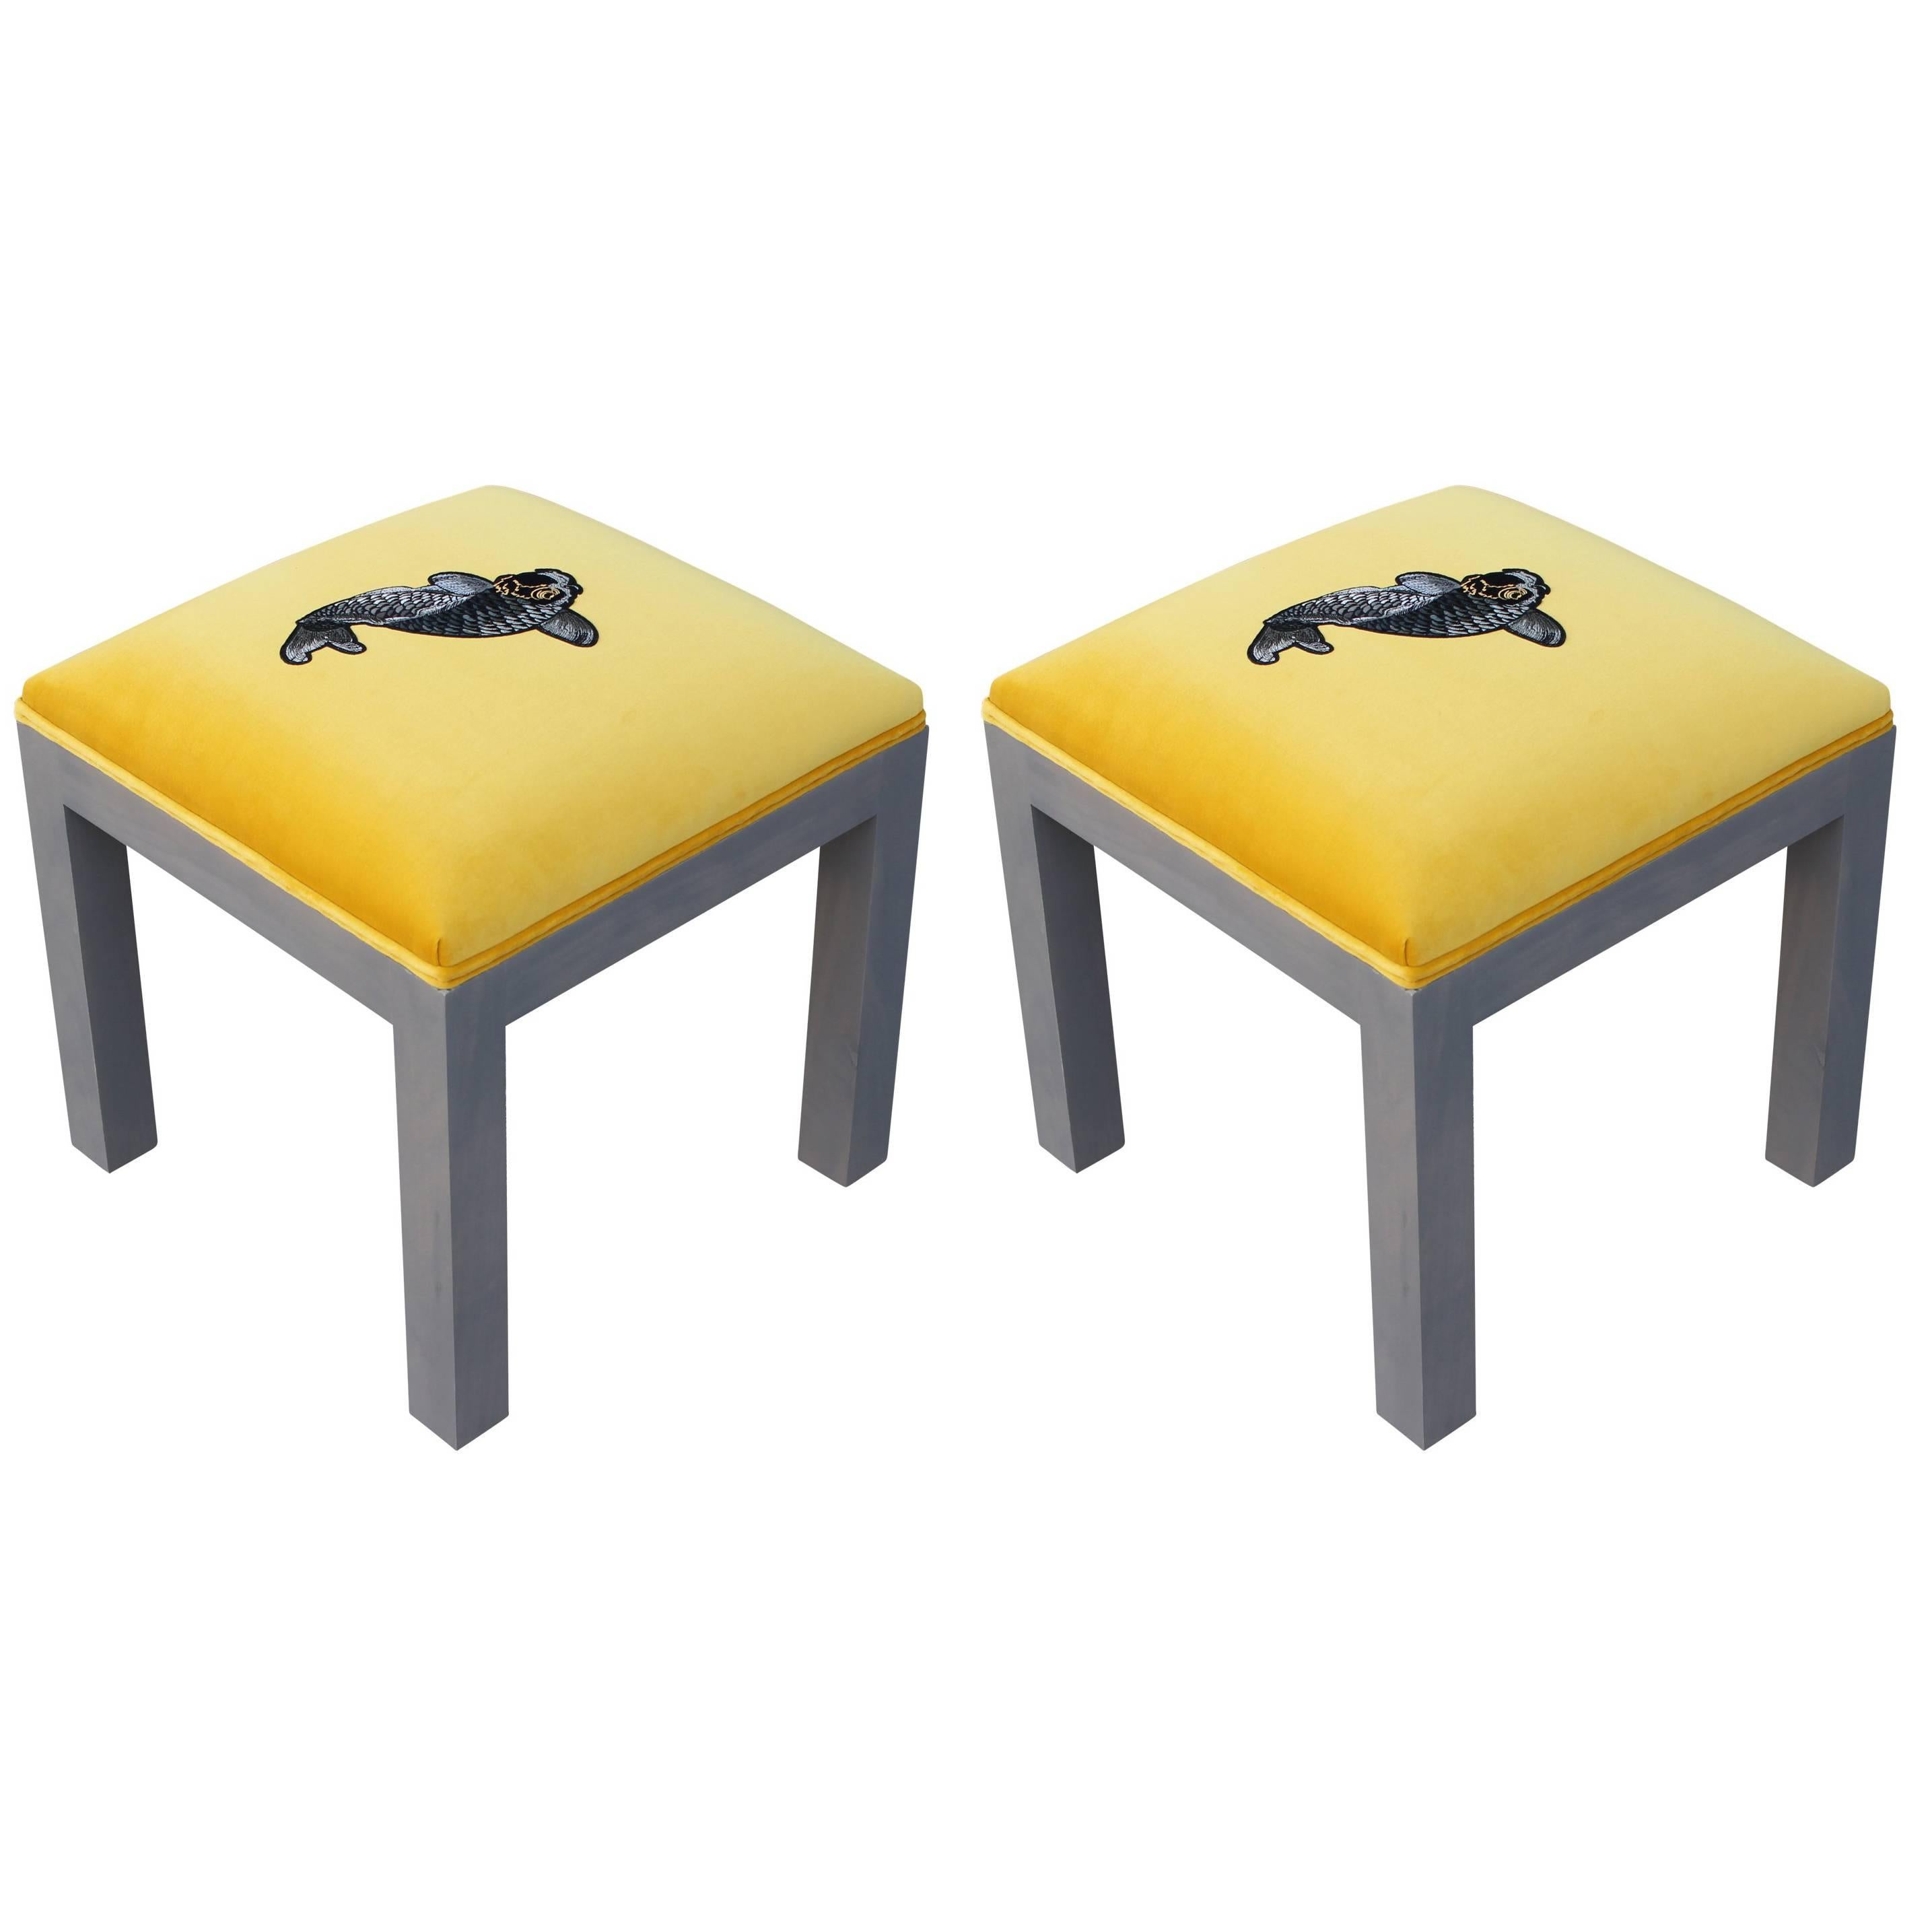 Luxe Modern Yellow Velvet Pair of Ottomans or Stools, Embroidered Koi Fish